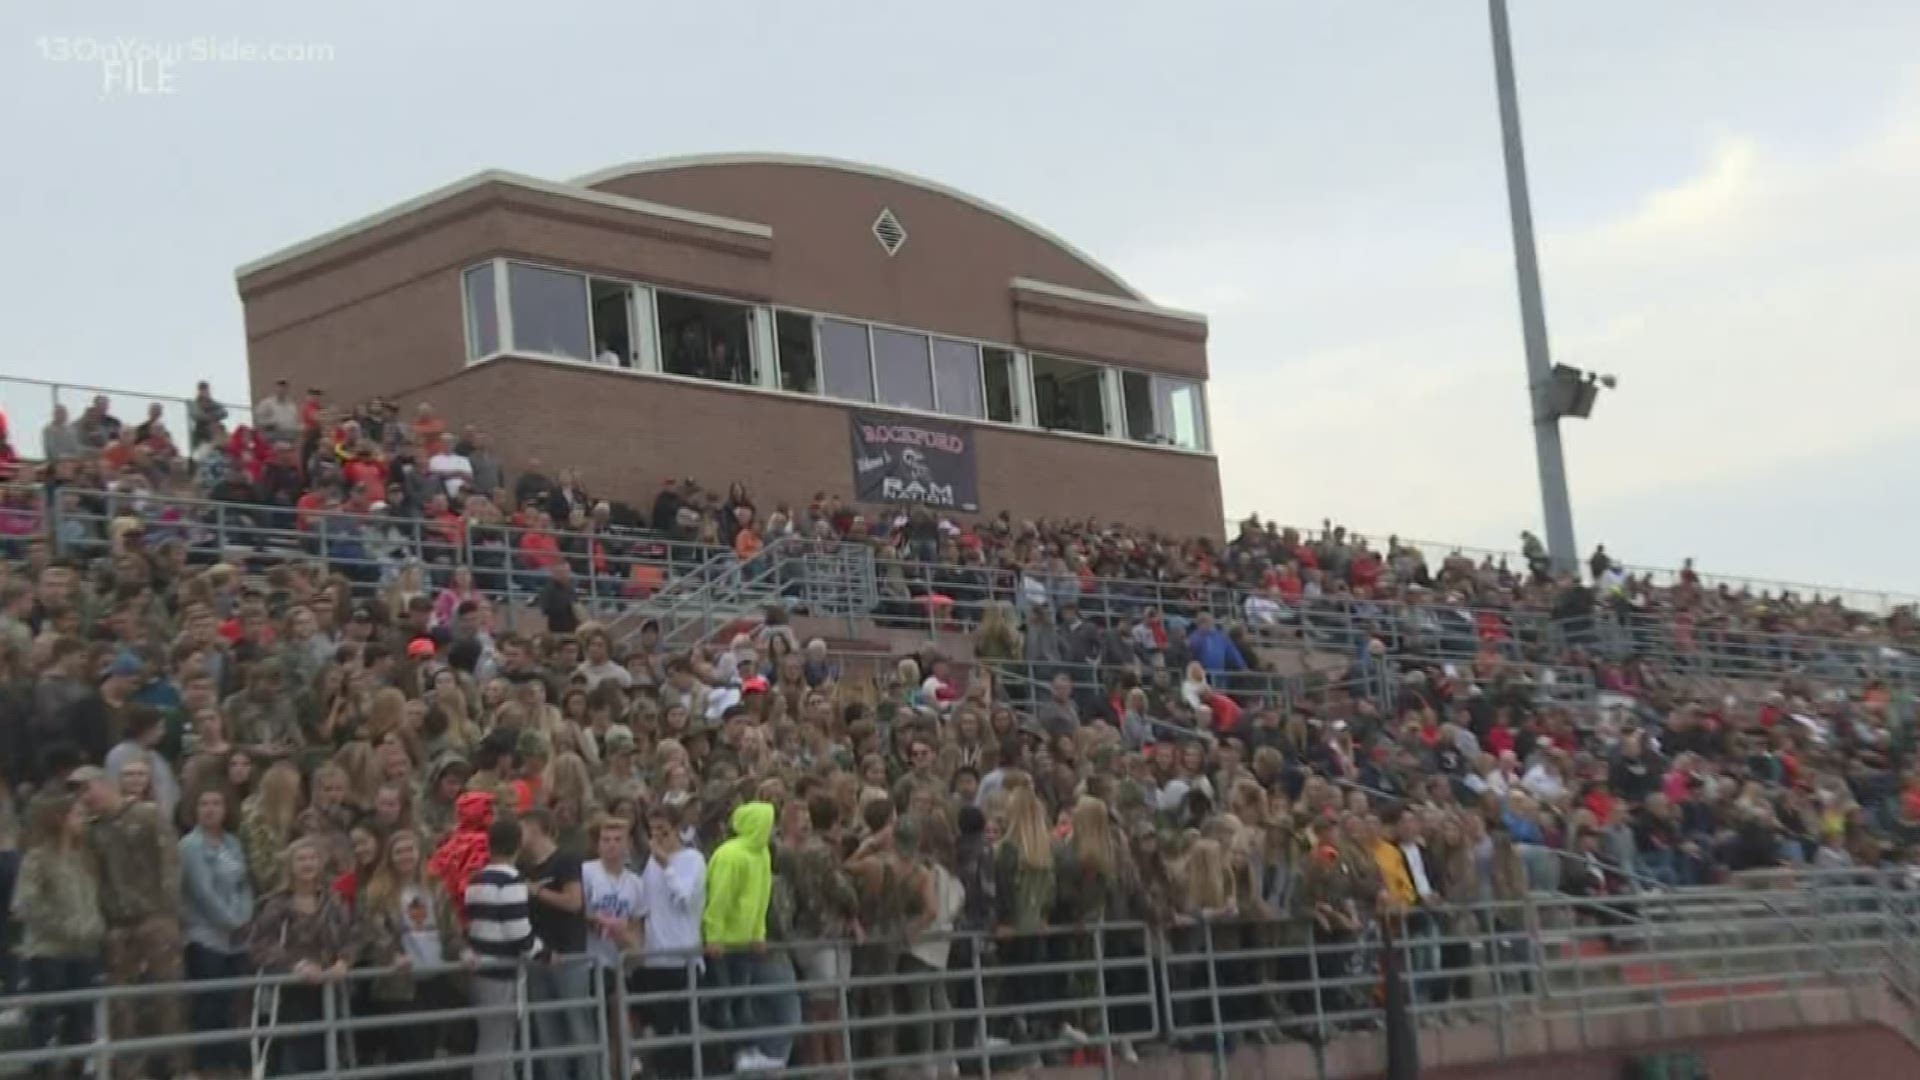 The Ted Carlson Memorial Stadium in Rockford might be getting a new name.